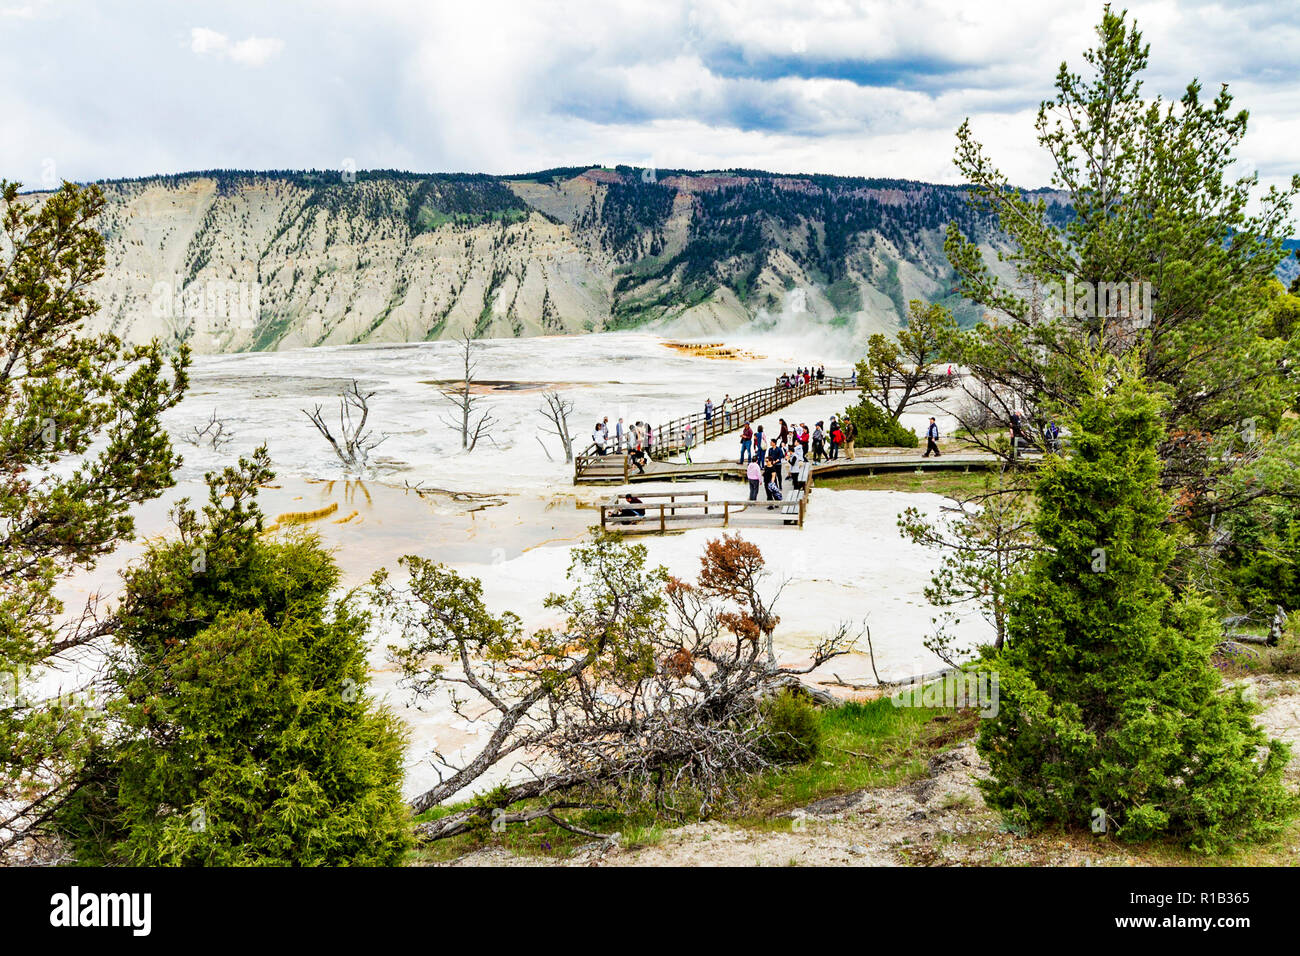 Mamoth hot springs panorama view in Yellowstone National Park Stock Photo